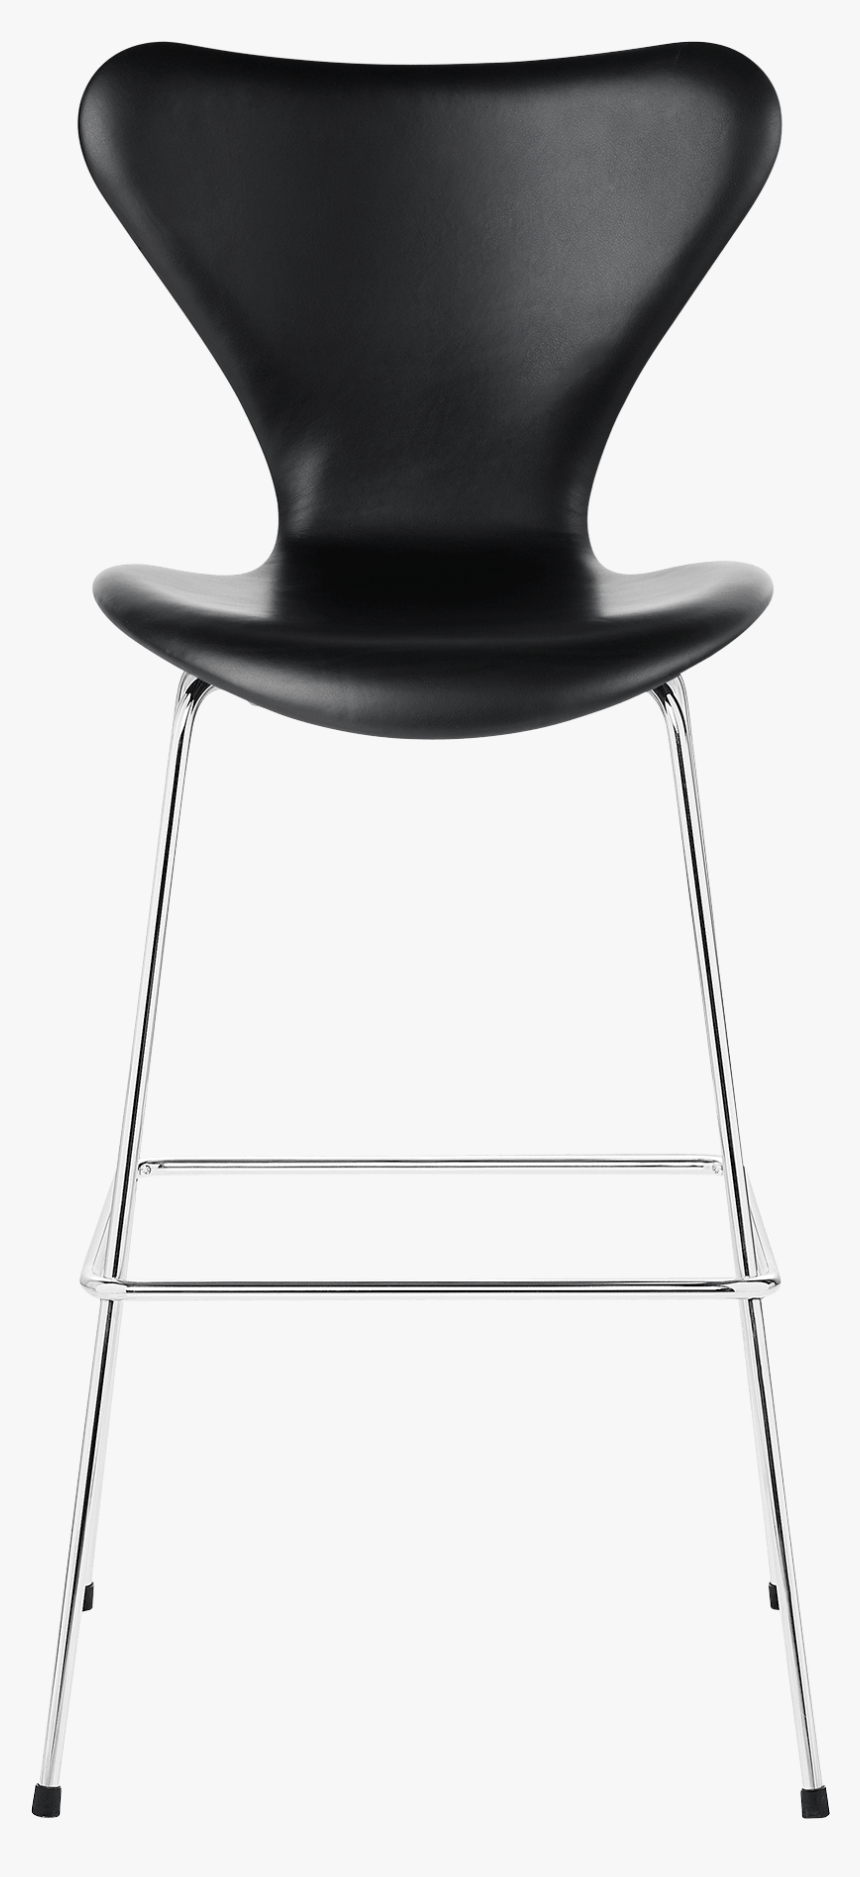 3197 Series 7 Barstool Fully Upholstered Black Leather - Fritz Hansen Series 7 Stool, HD Png Download, Free Download